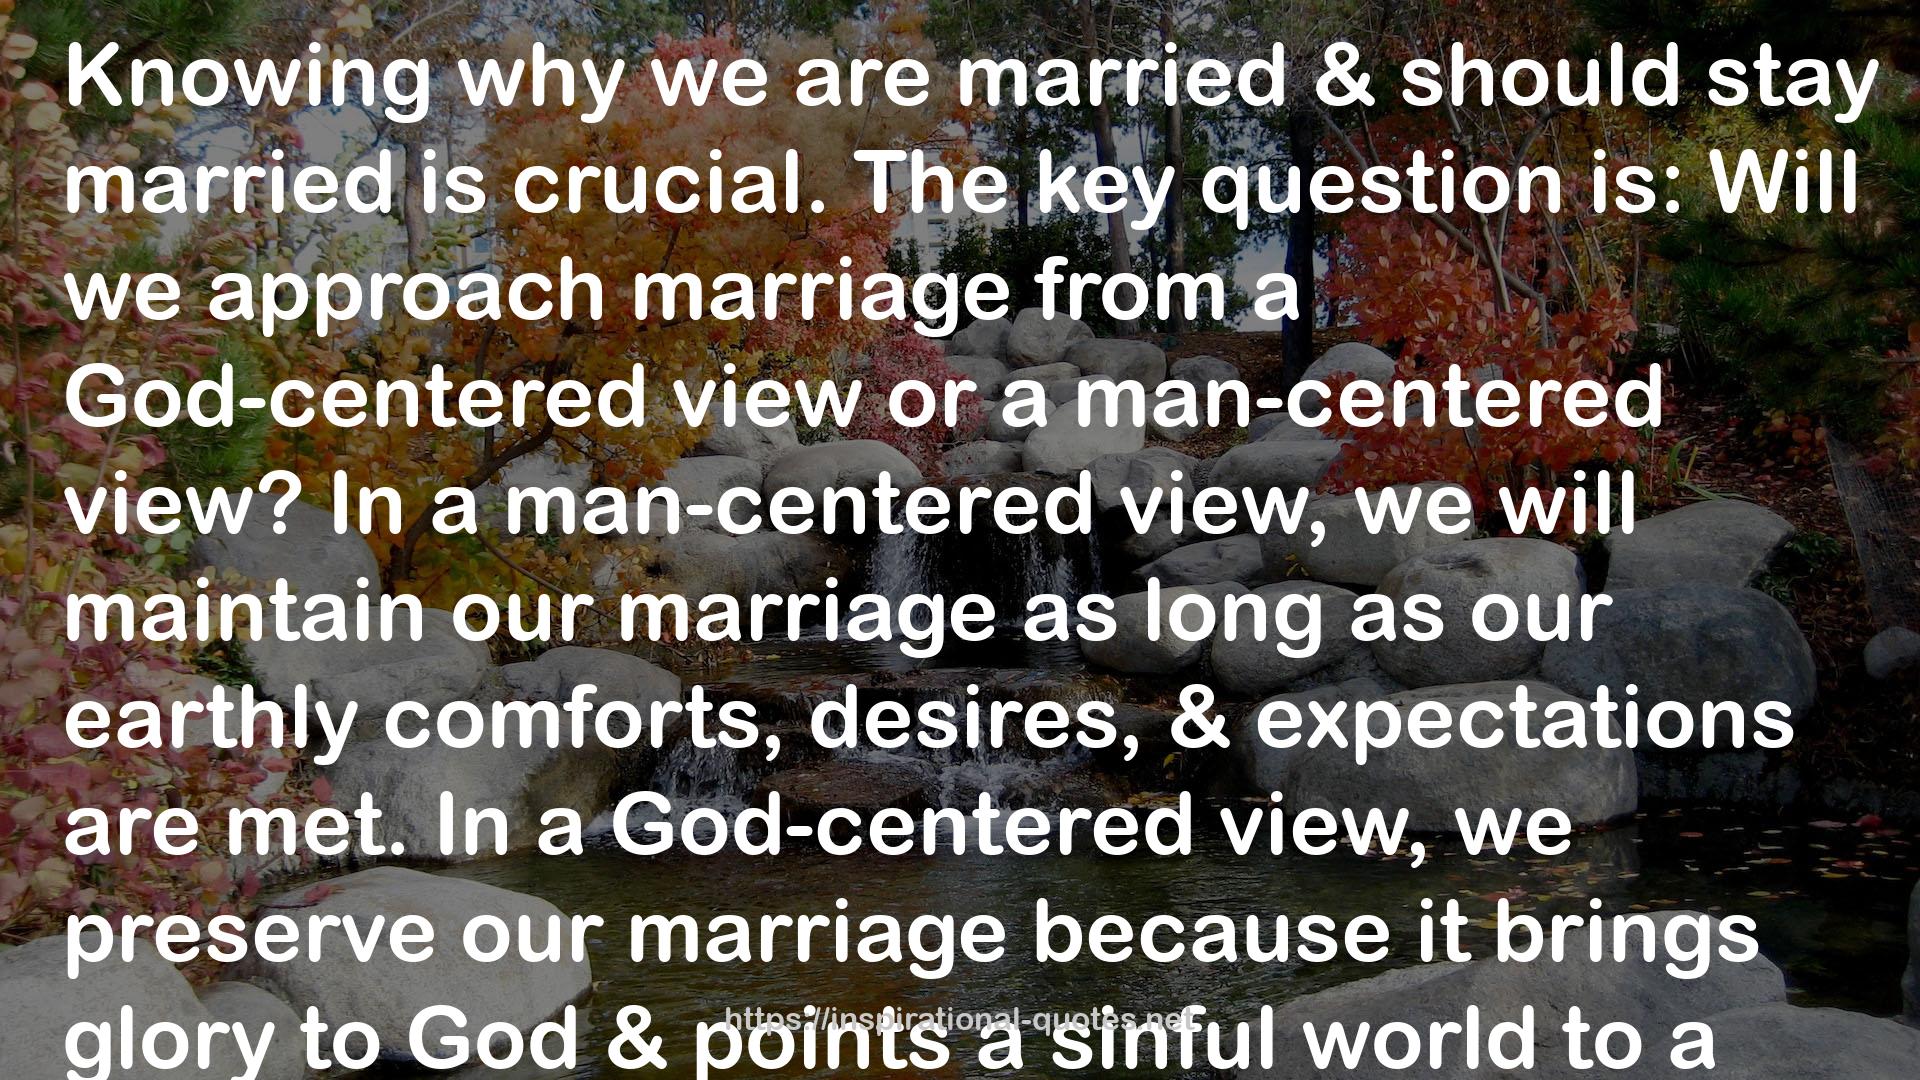 a God-centered view  QUOTES